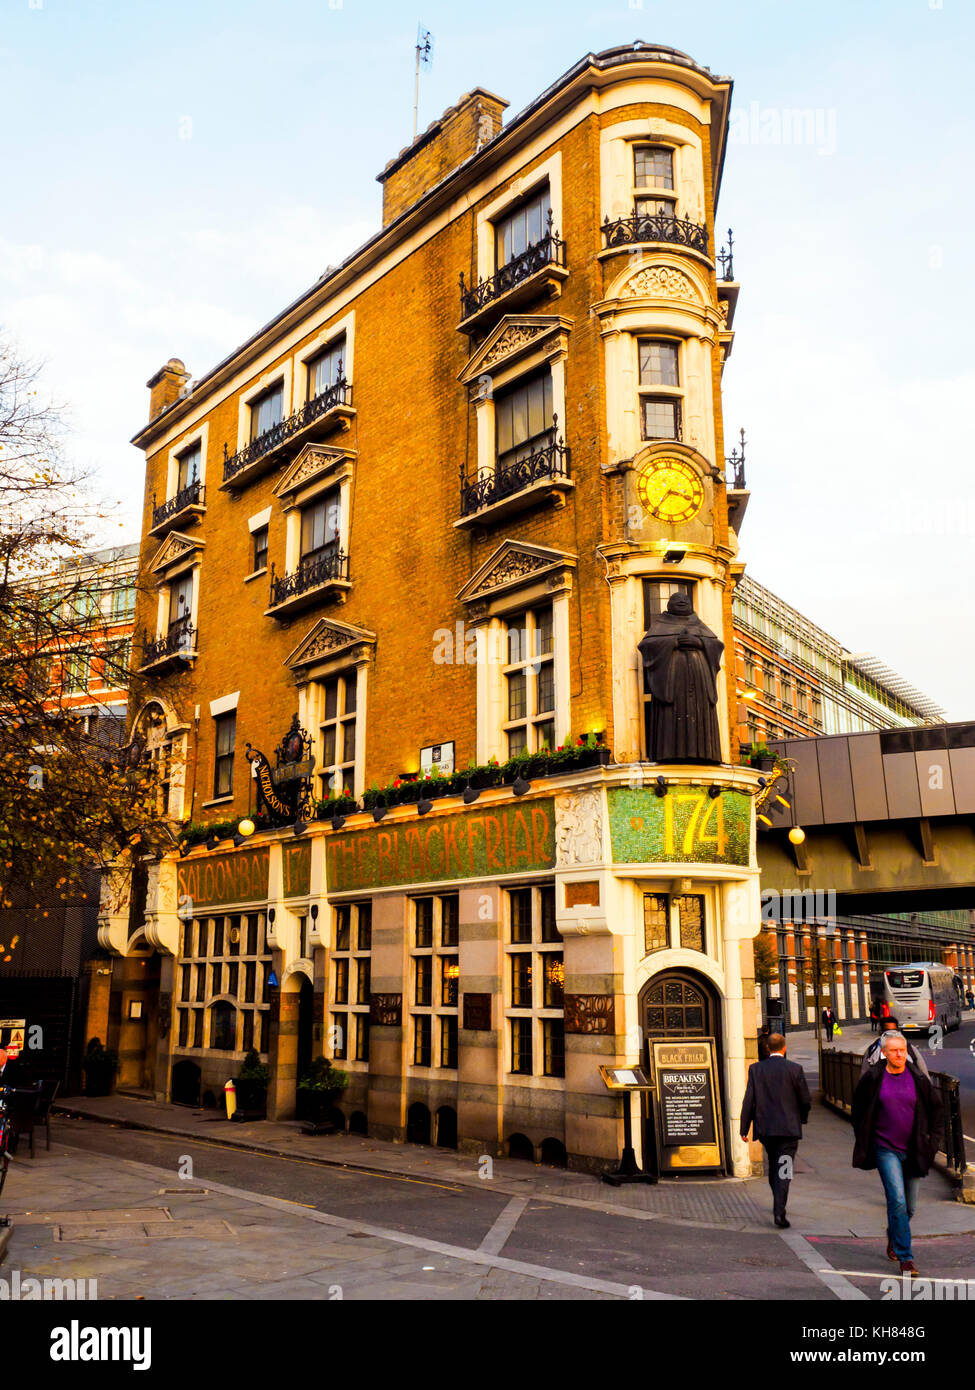 The Black Friar Pub is a traditional pub with Henry Poole's Art Nouveau reliefs reflecting the friary that once stood there- London, England Stock Photo